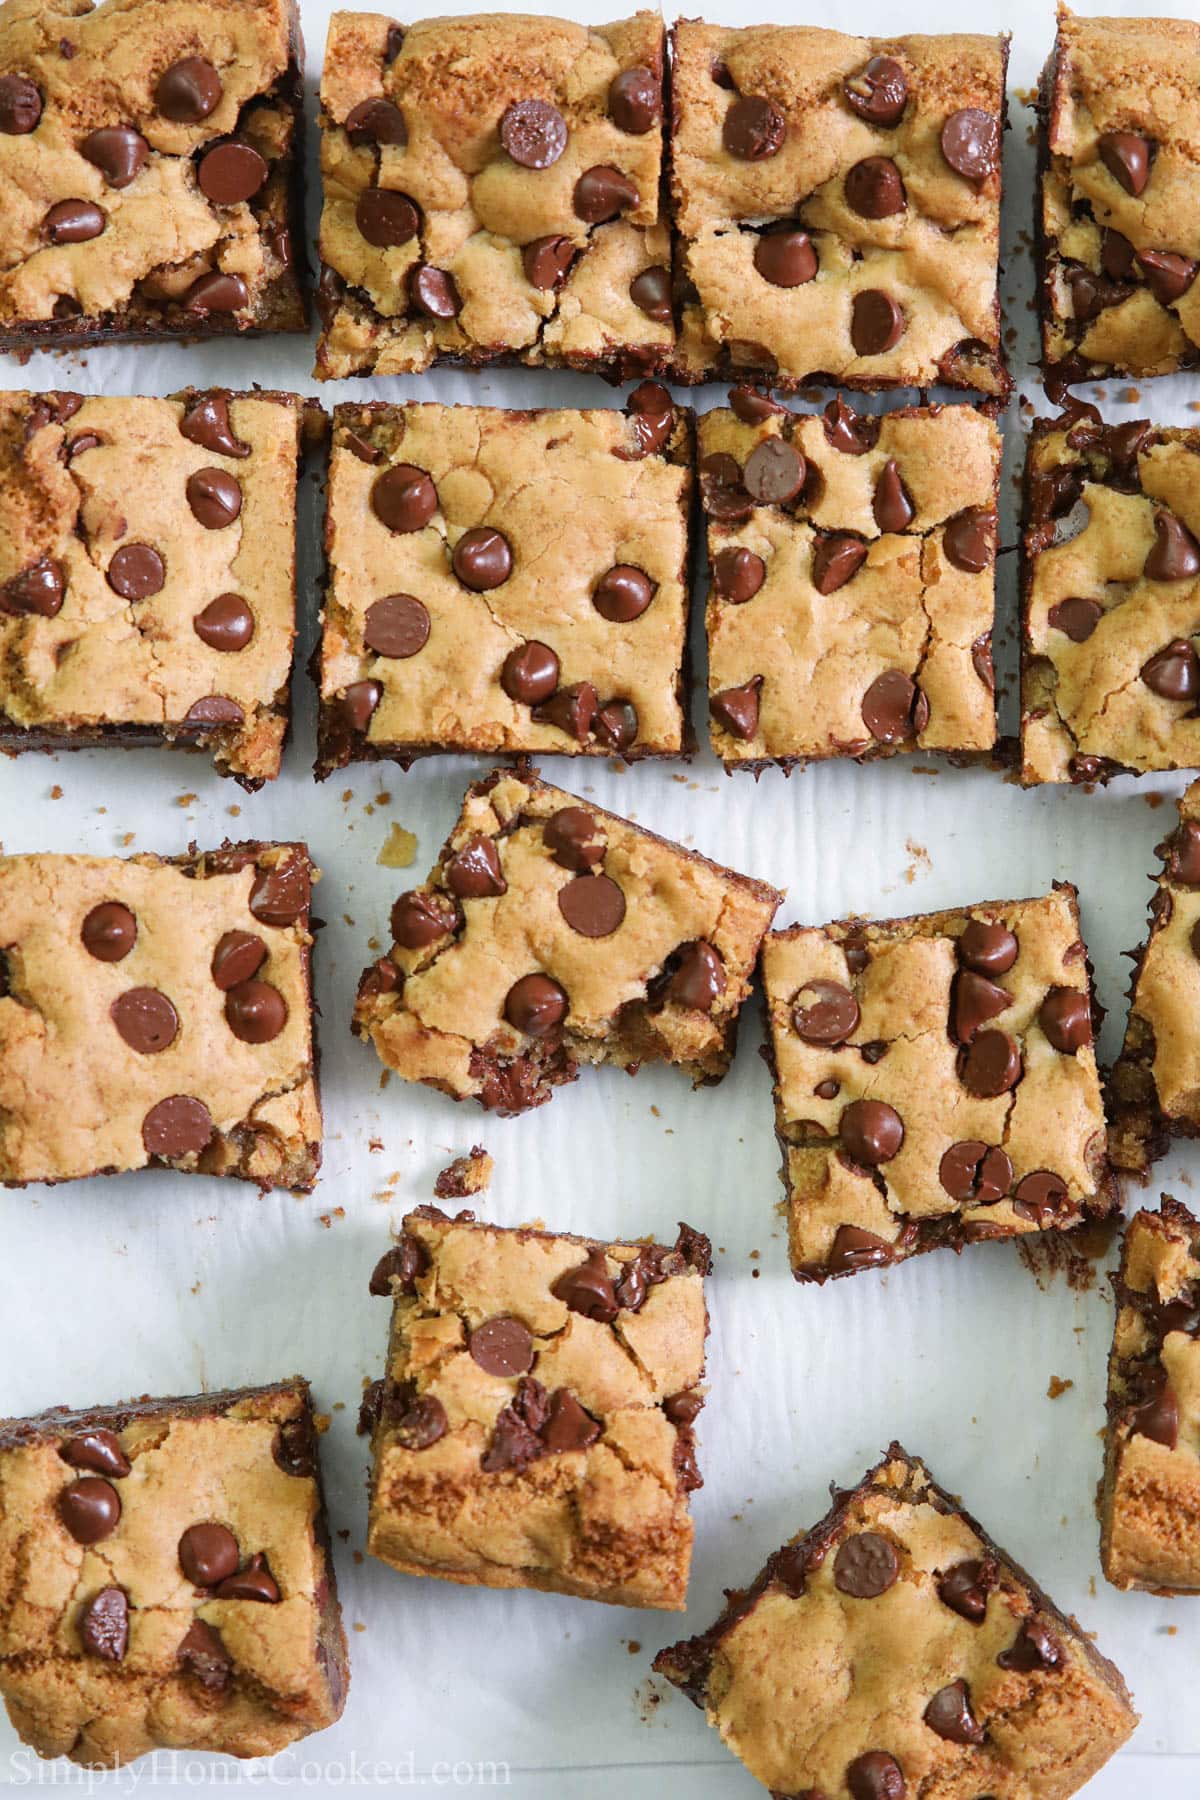 Vertical image of Chocolate Chip Cookie Bars, one missing a bite